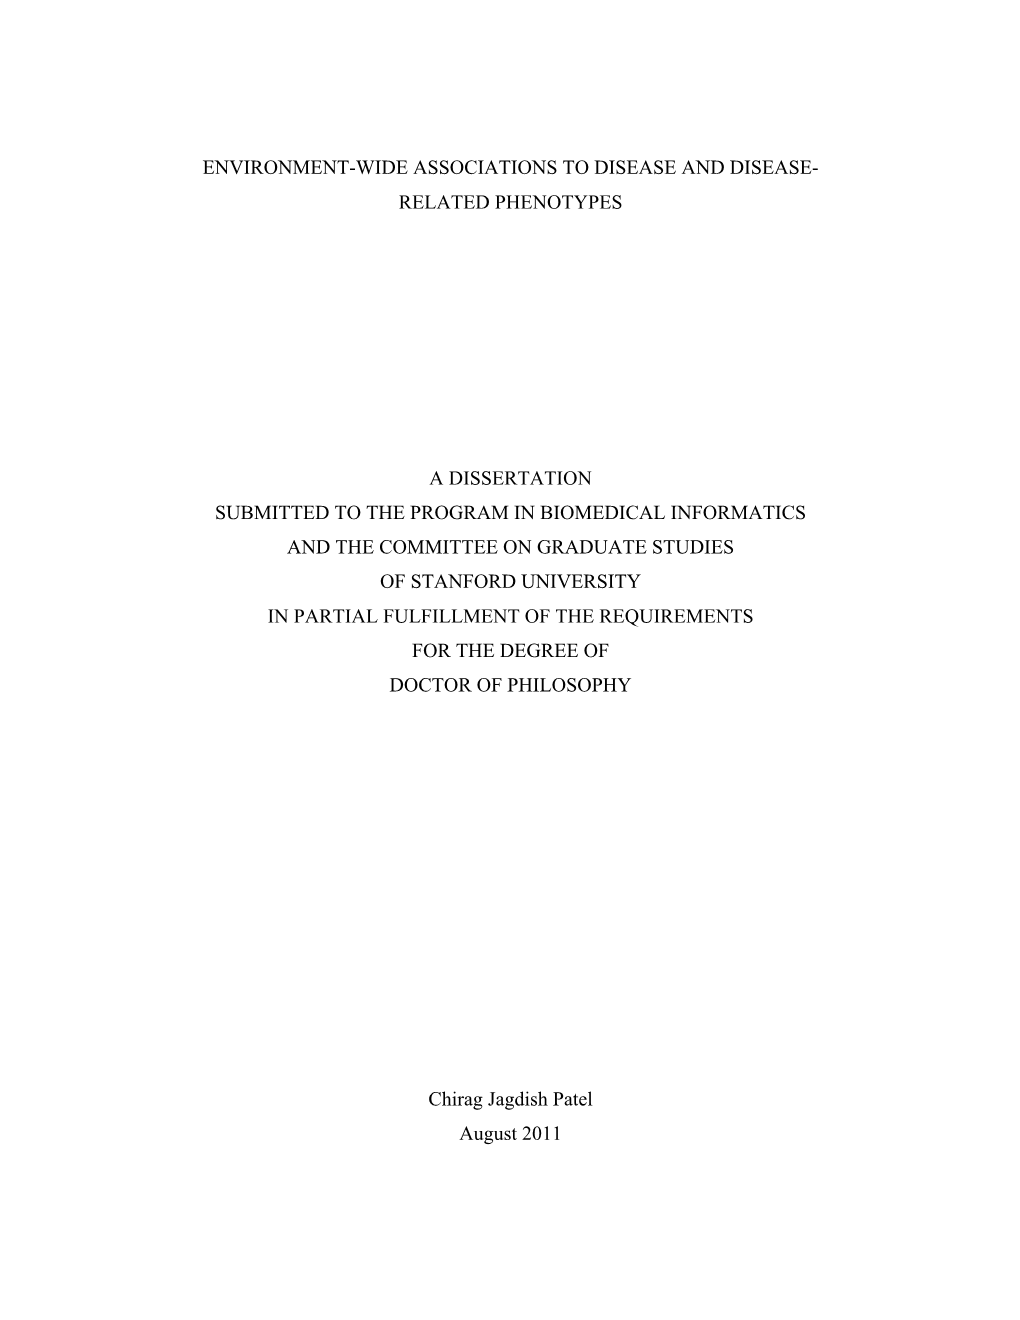 Related Phenotypes a Dissertation Submitted to The